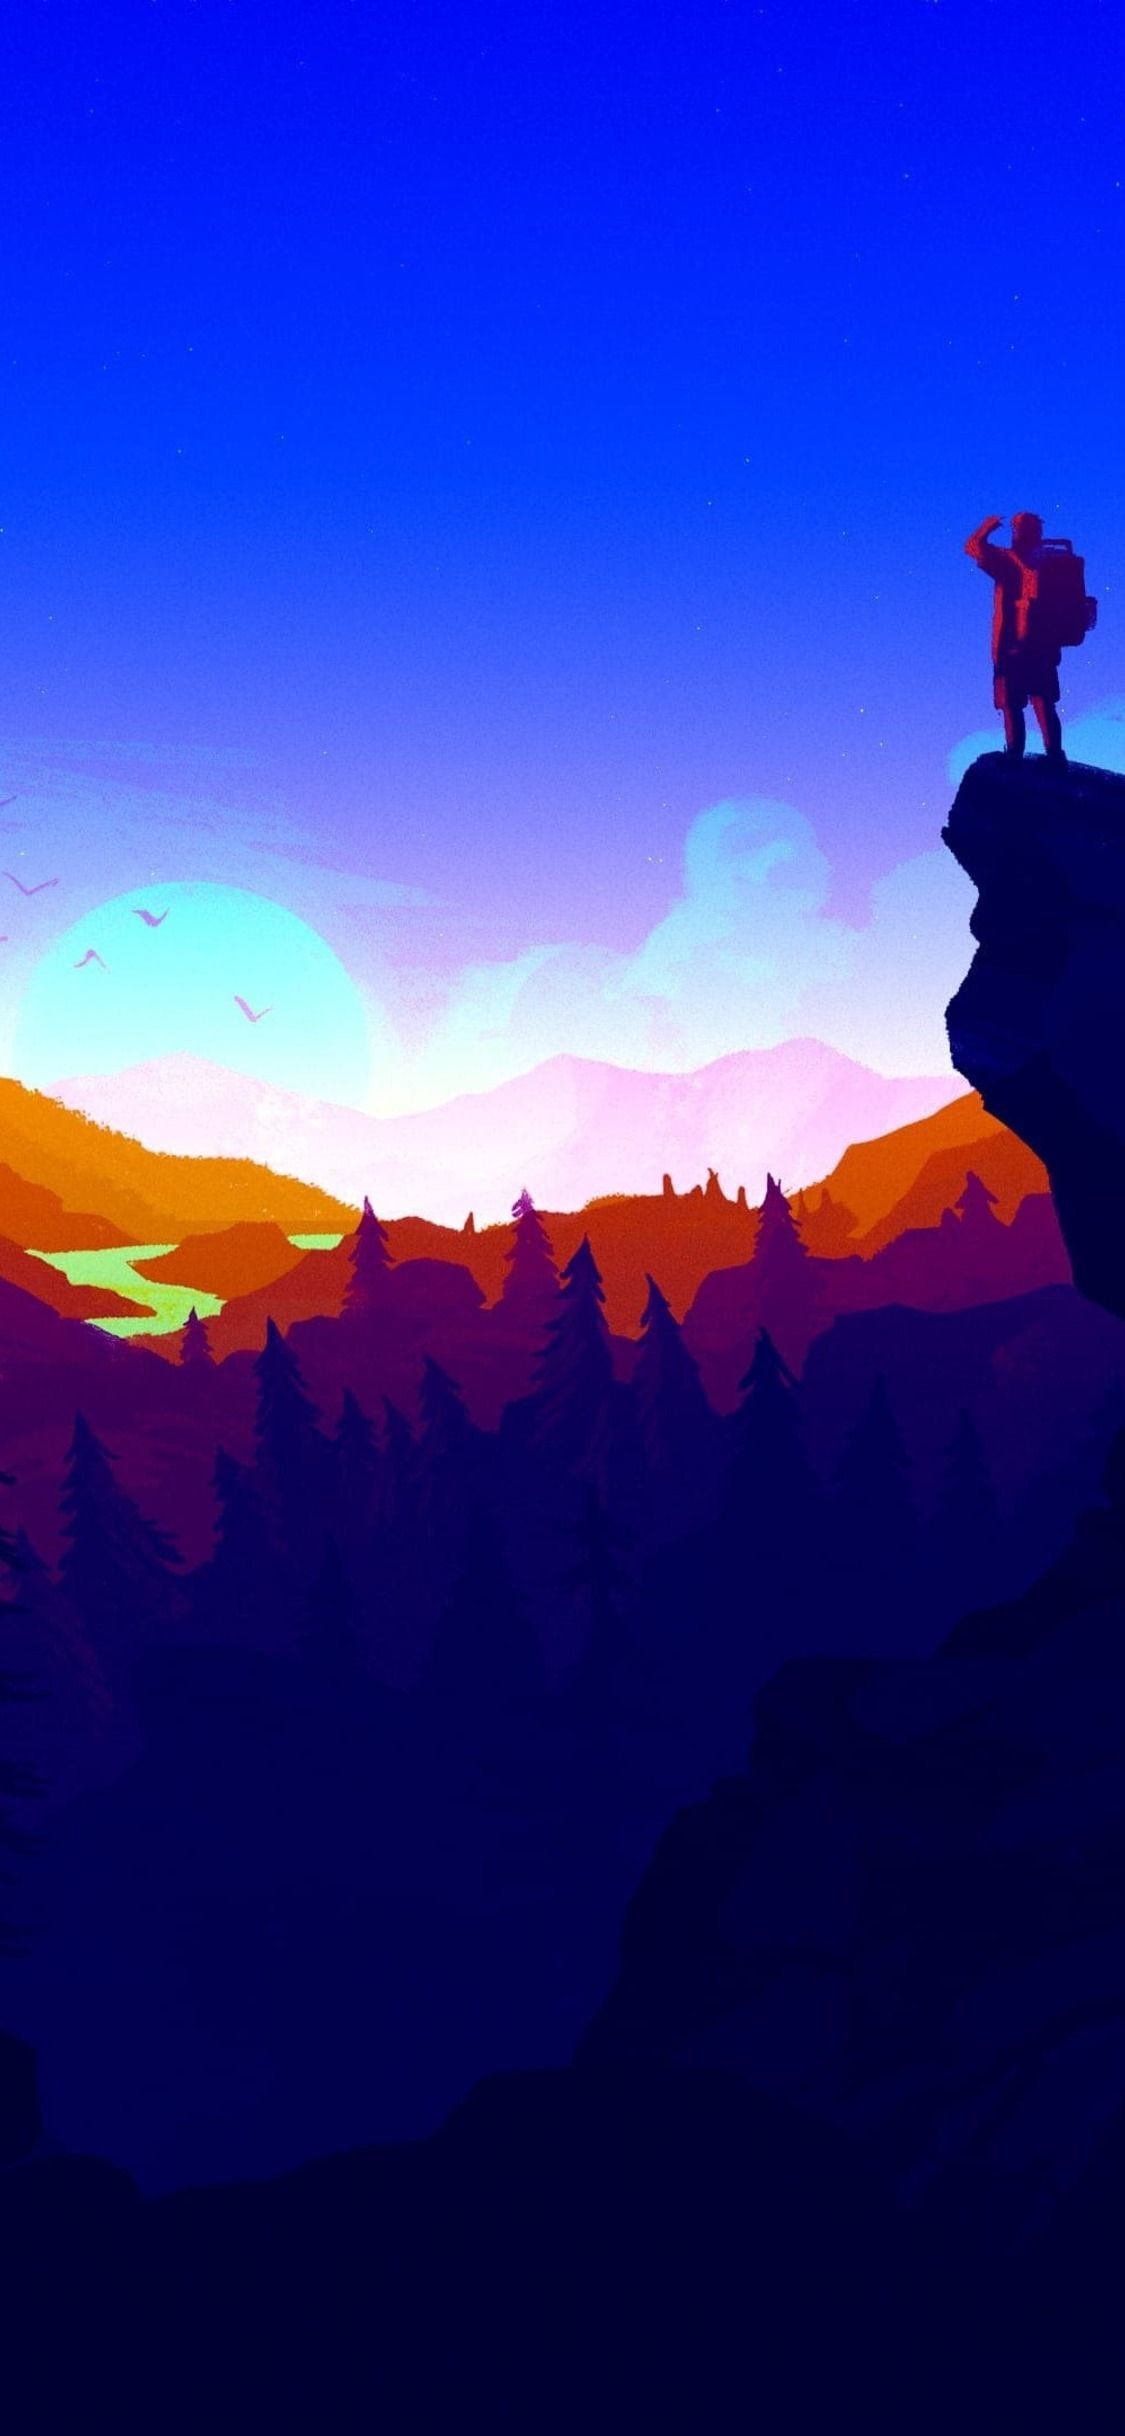 Firewatch 4k Iphone X,iphone 10 Hd 4k Wallpapers, Images - 4k Wallpaper Iphone - HD Wallpaper 